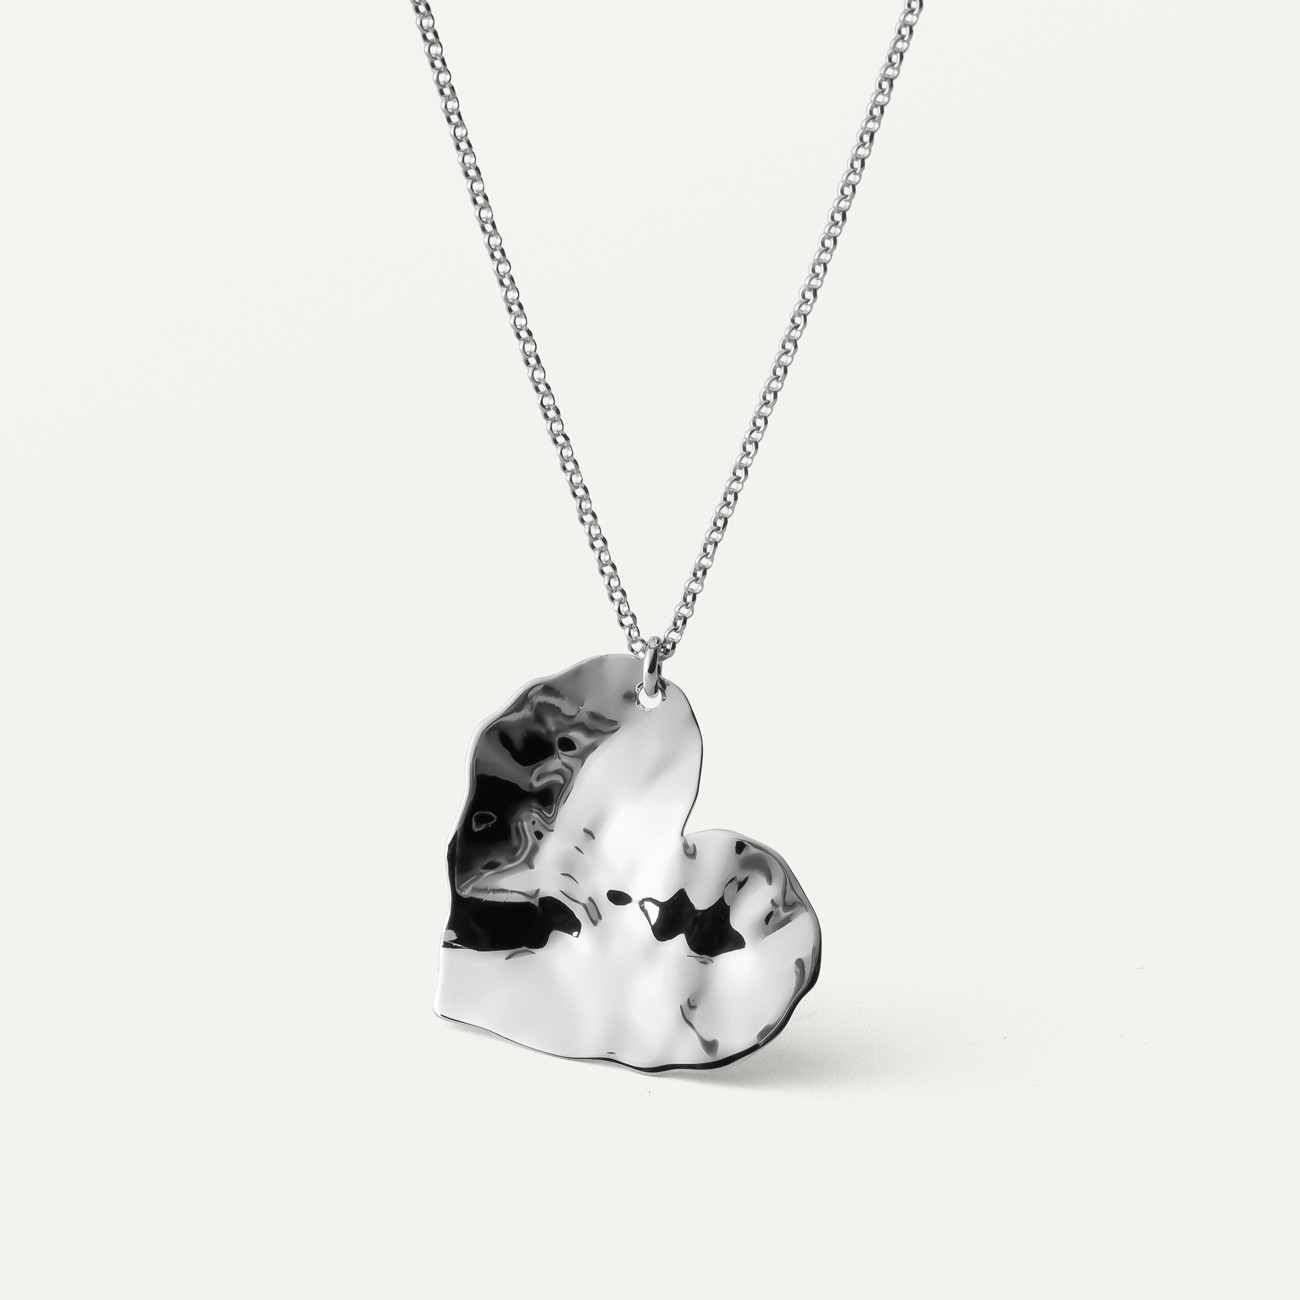 Silver necklace with a crushed heart plate